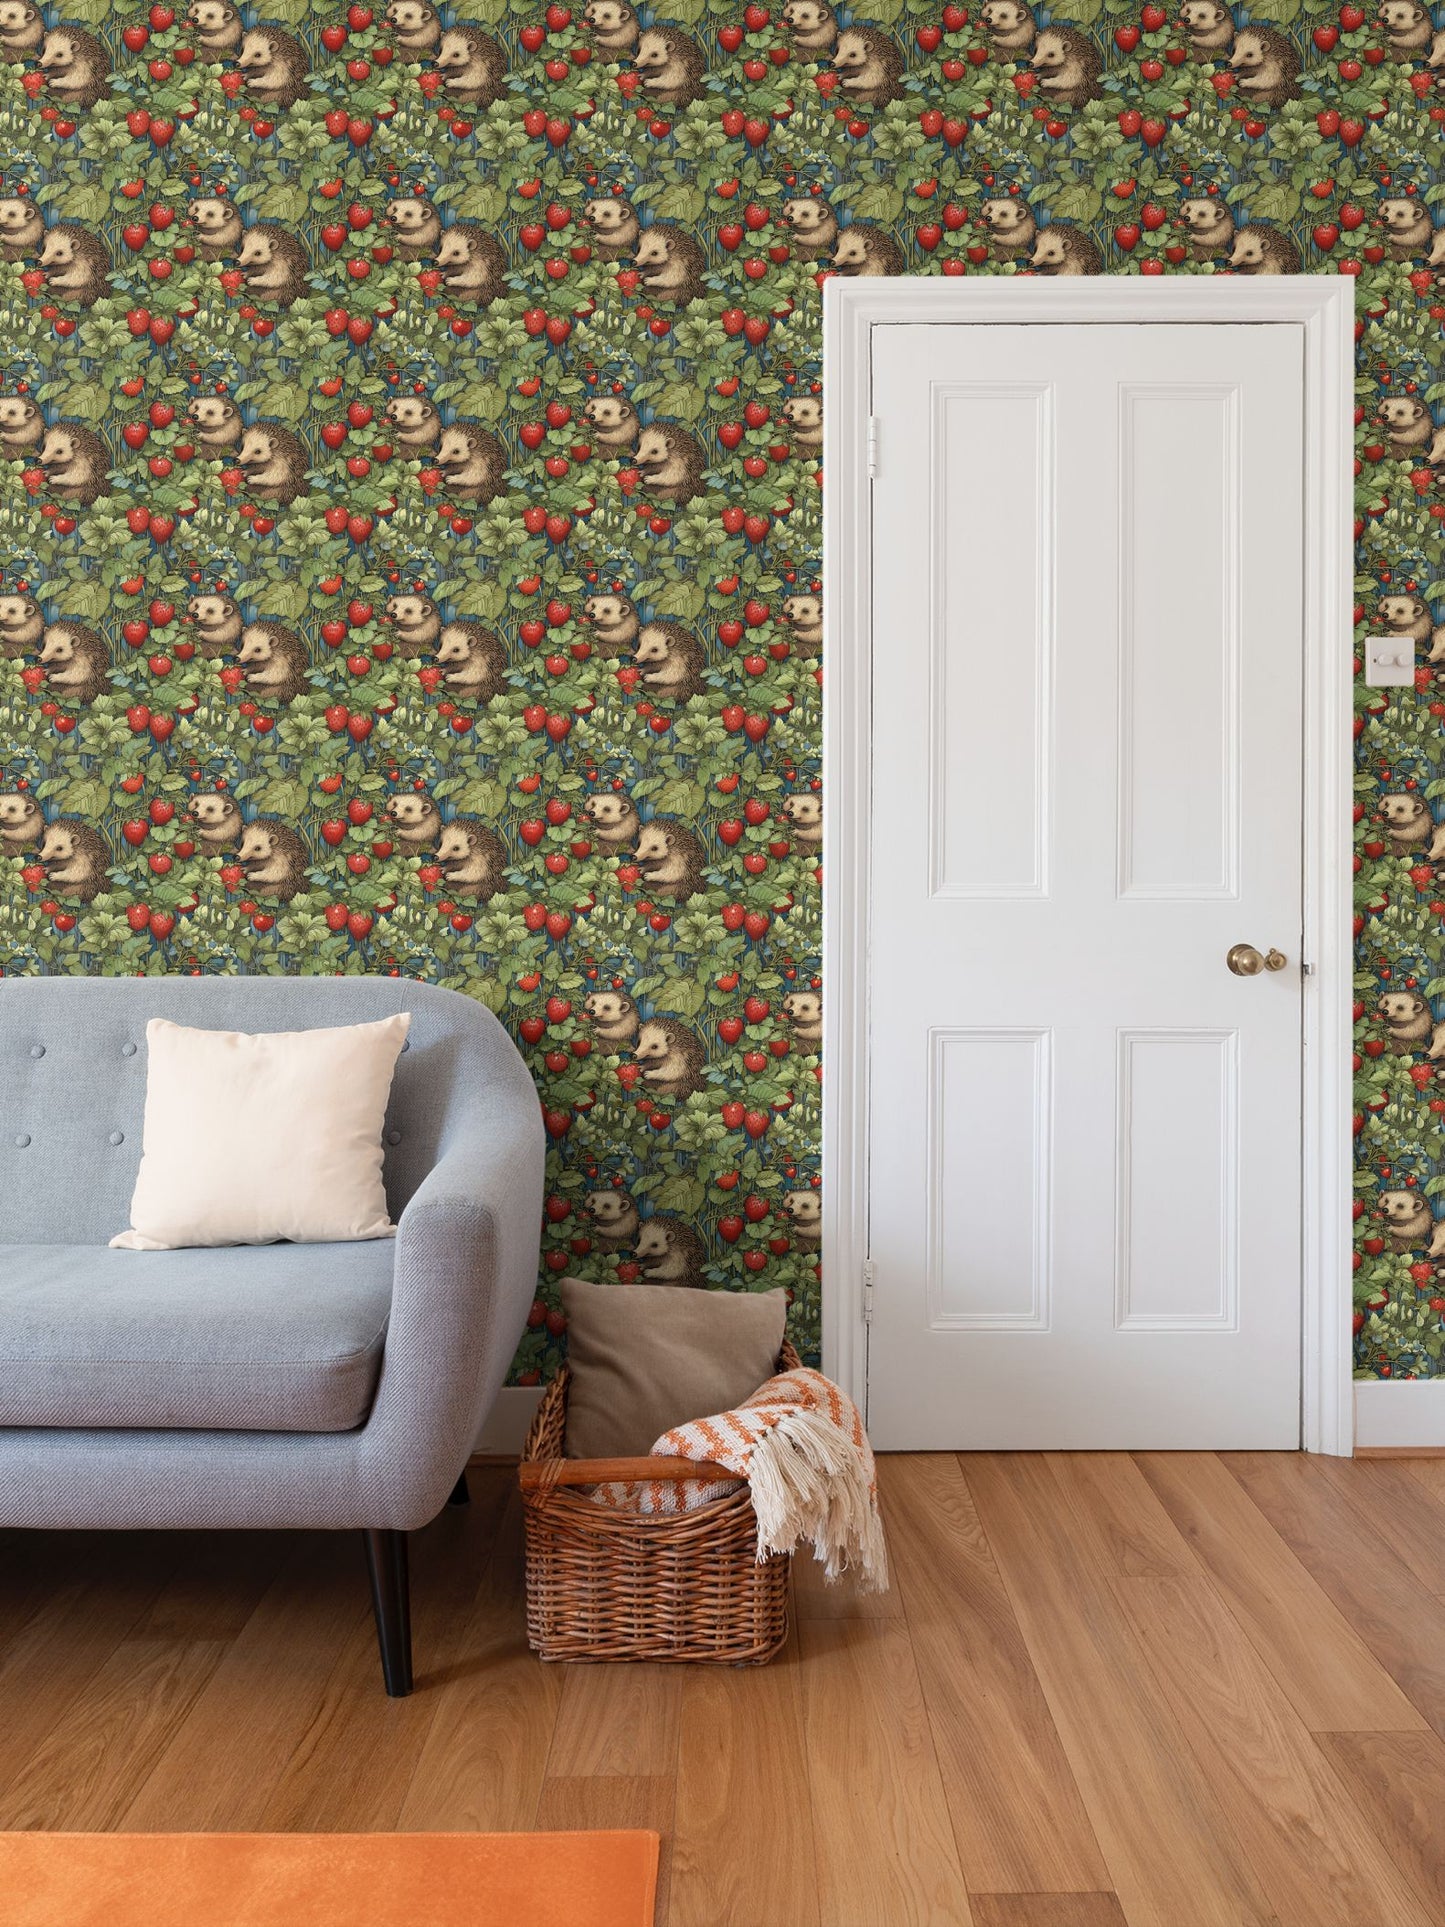 Berry Patch Hedgehogs Repeat Pattern Wallpaper